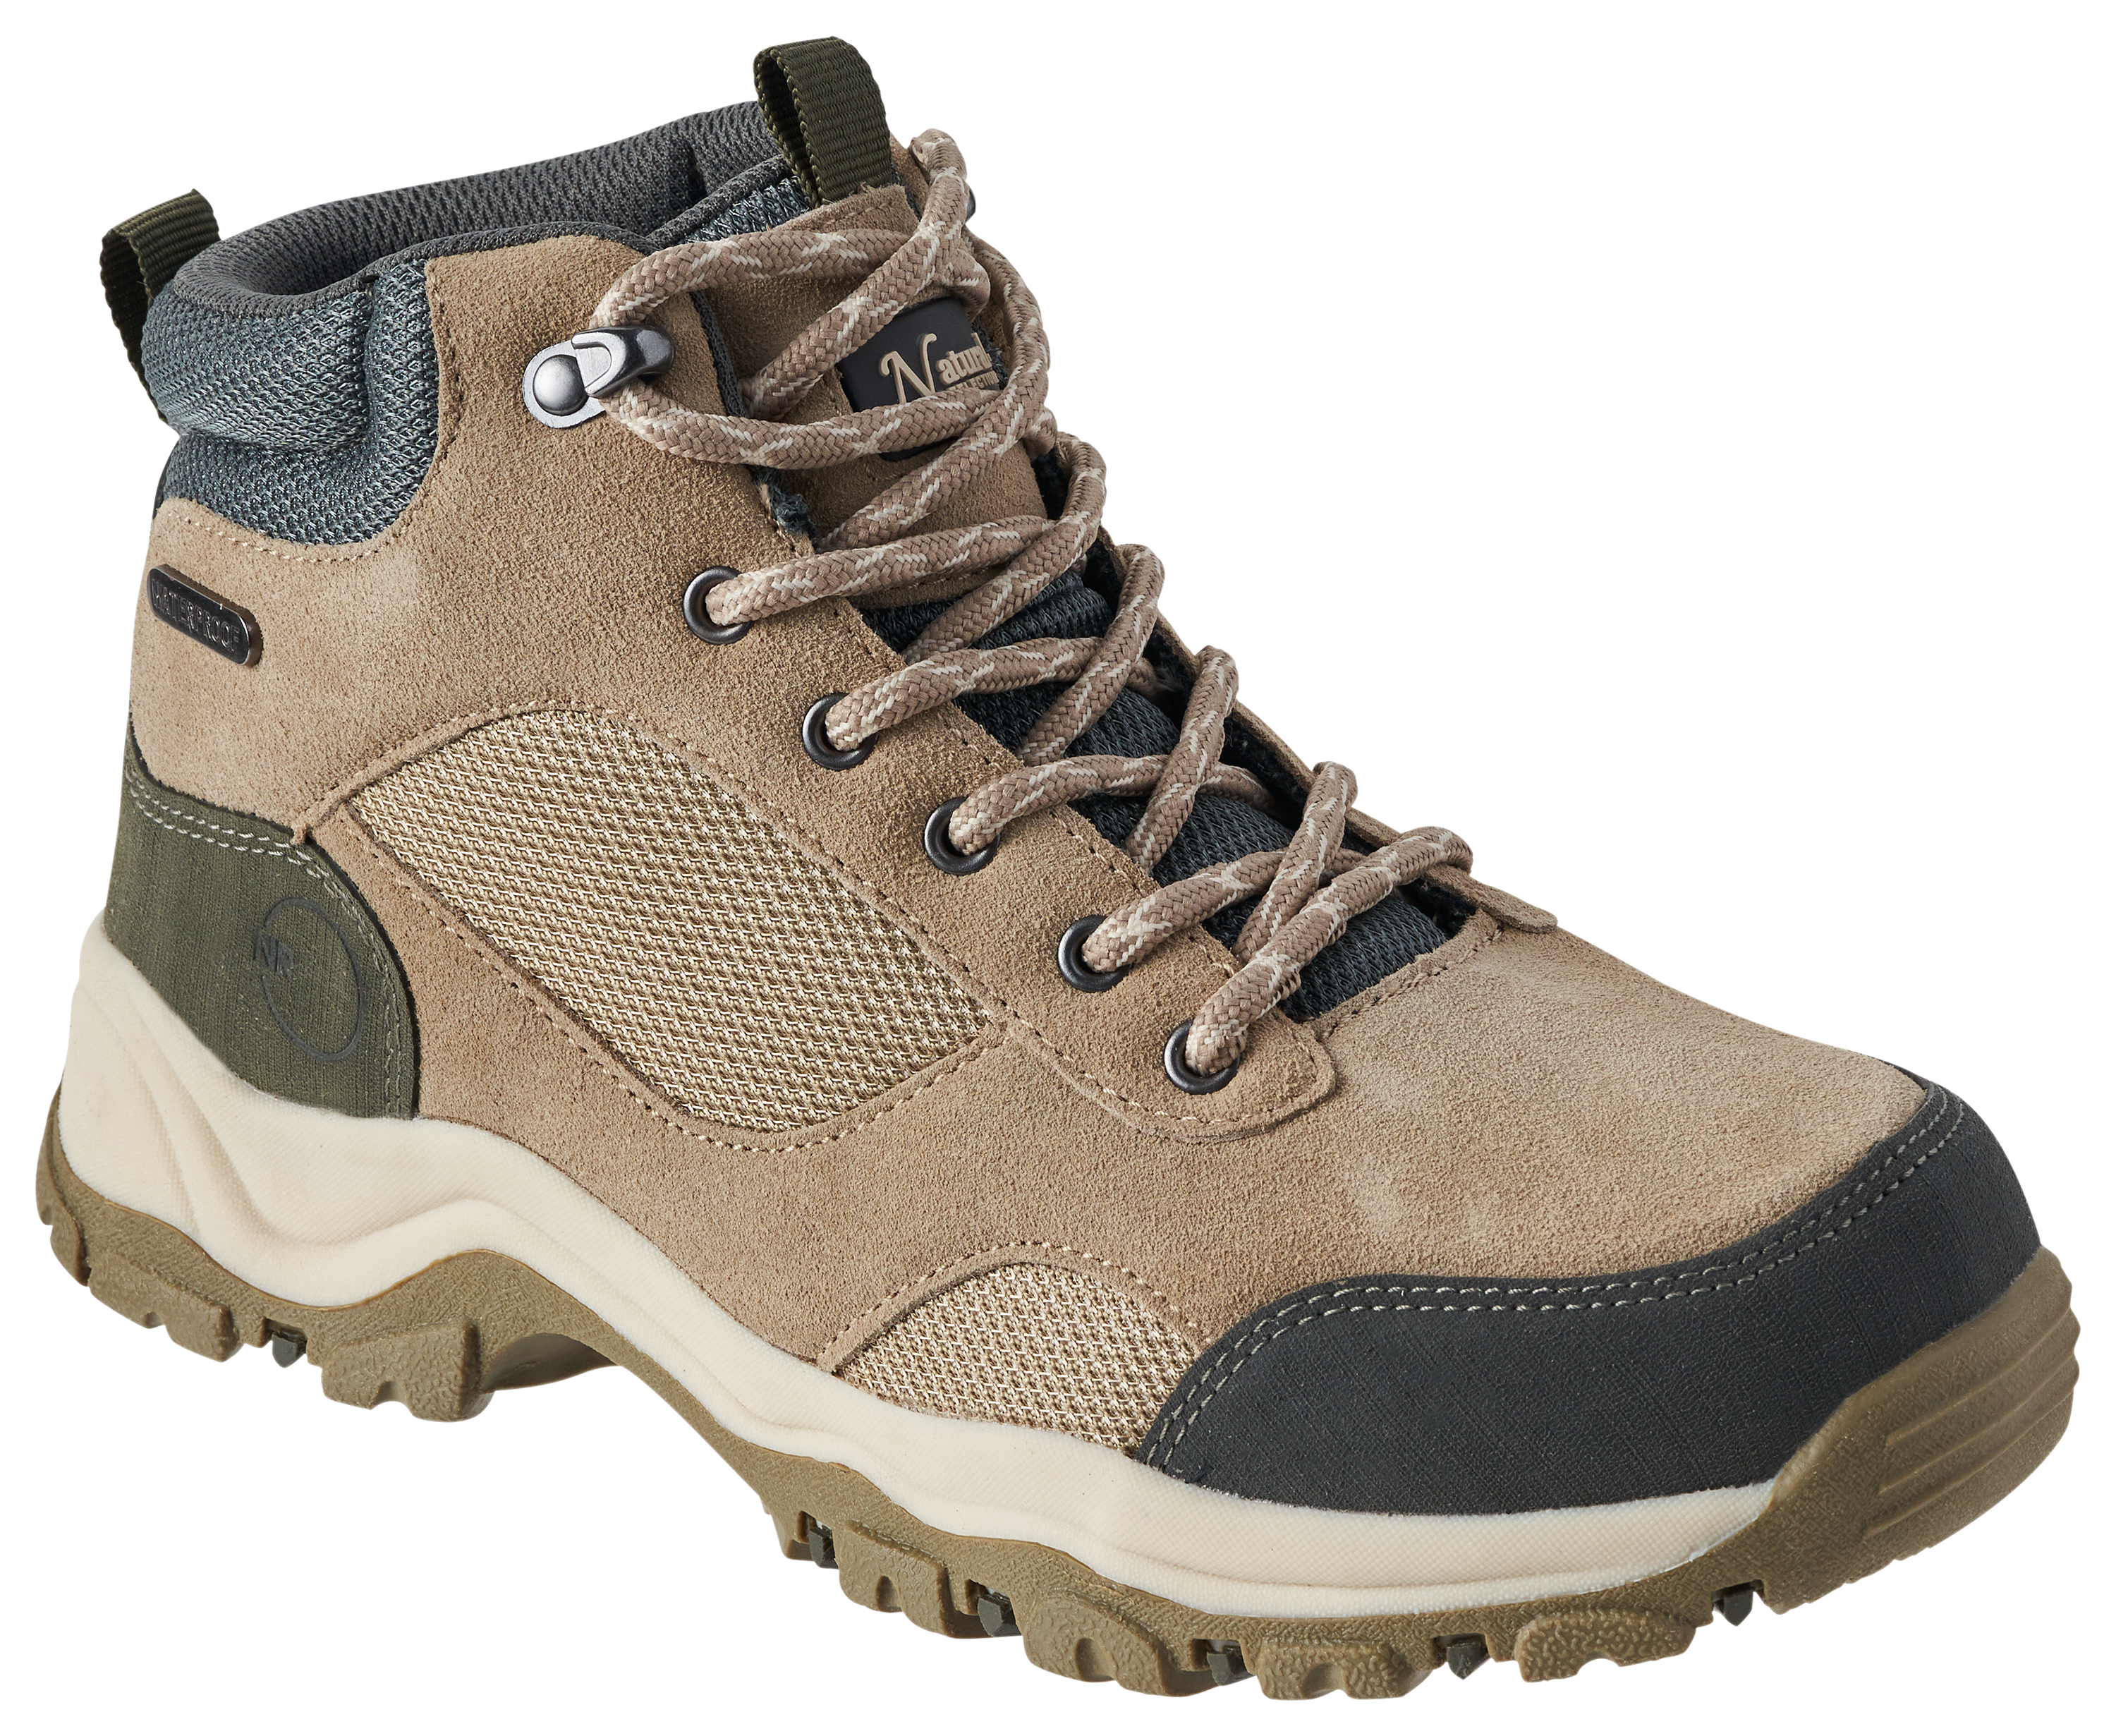 Natural Reflections Skyline II Mid Waterproof Hiking Boots for Ladies - Tan/Charcoal - 10M